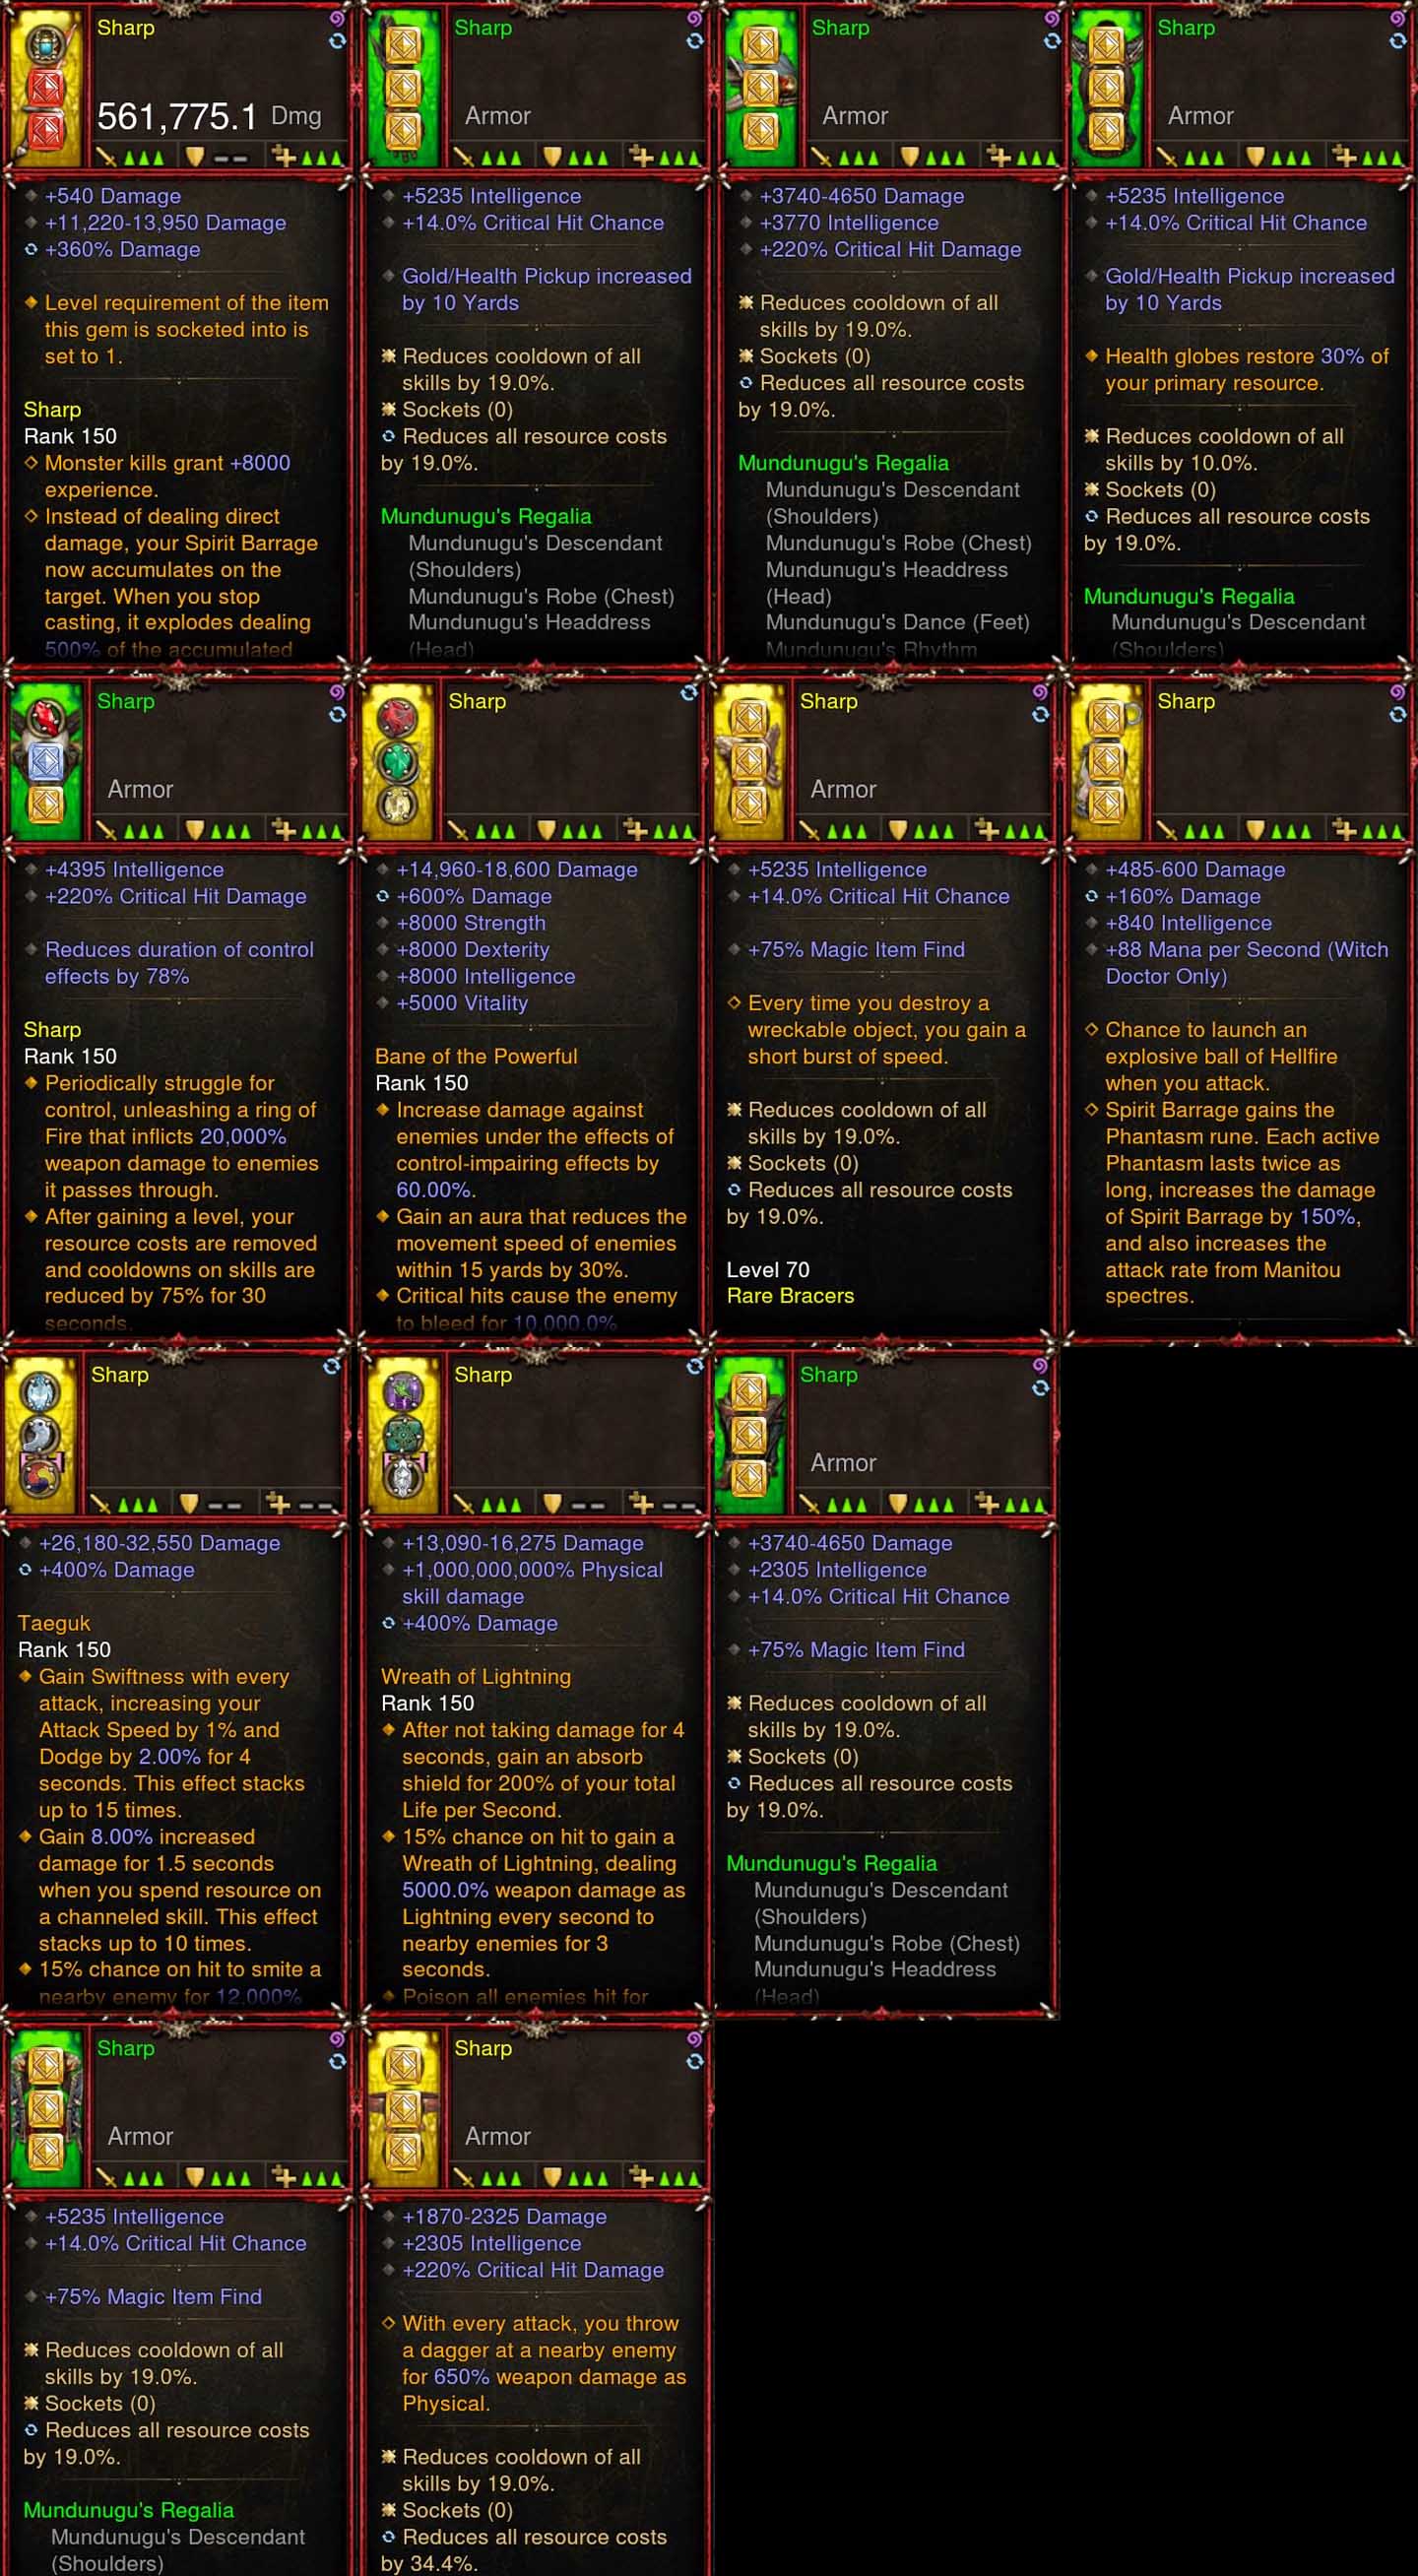 [Primal Ancient] [QUAD DPS] 2.6.8 Immortality v5 Mundunugu Witch Doctor Set Sharp Diablo 3 Mods ROS Seasonal and Non Seasonal Save Mod - Modded Items and Gear - Hacks - Cheats - Trainers for Playstation 4 - Playstation 5 - Nintendo Switch - Xbox One